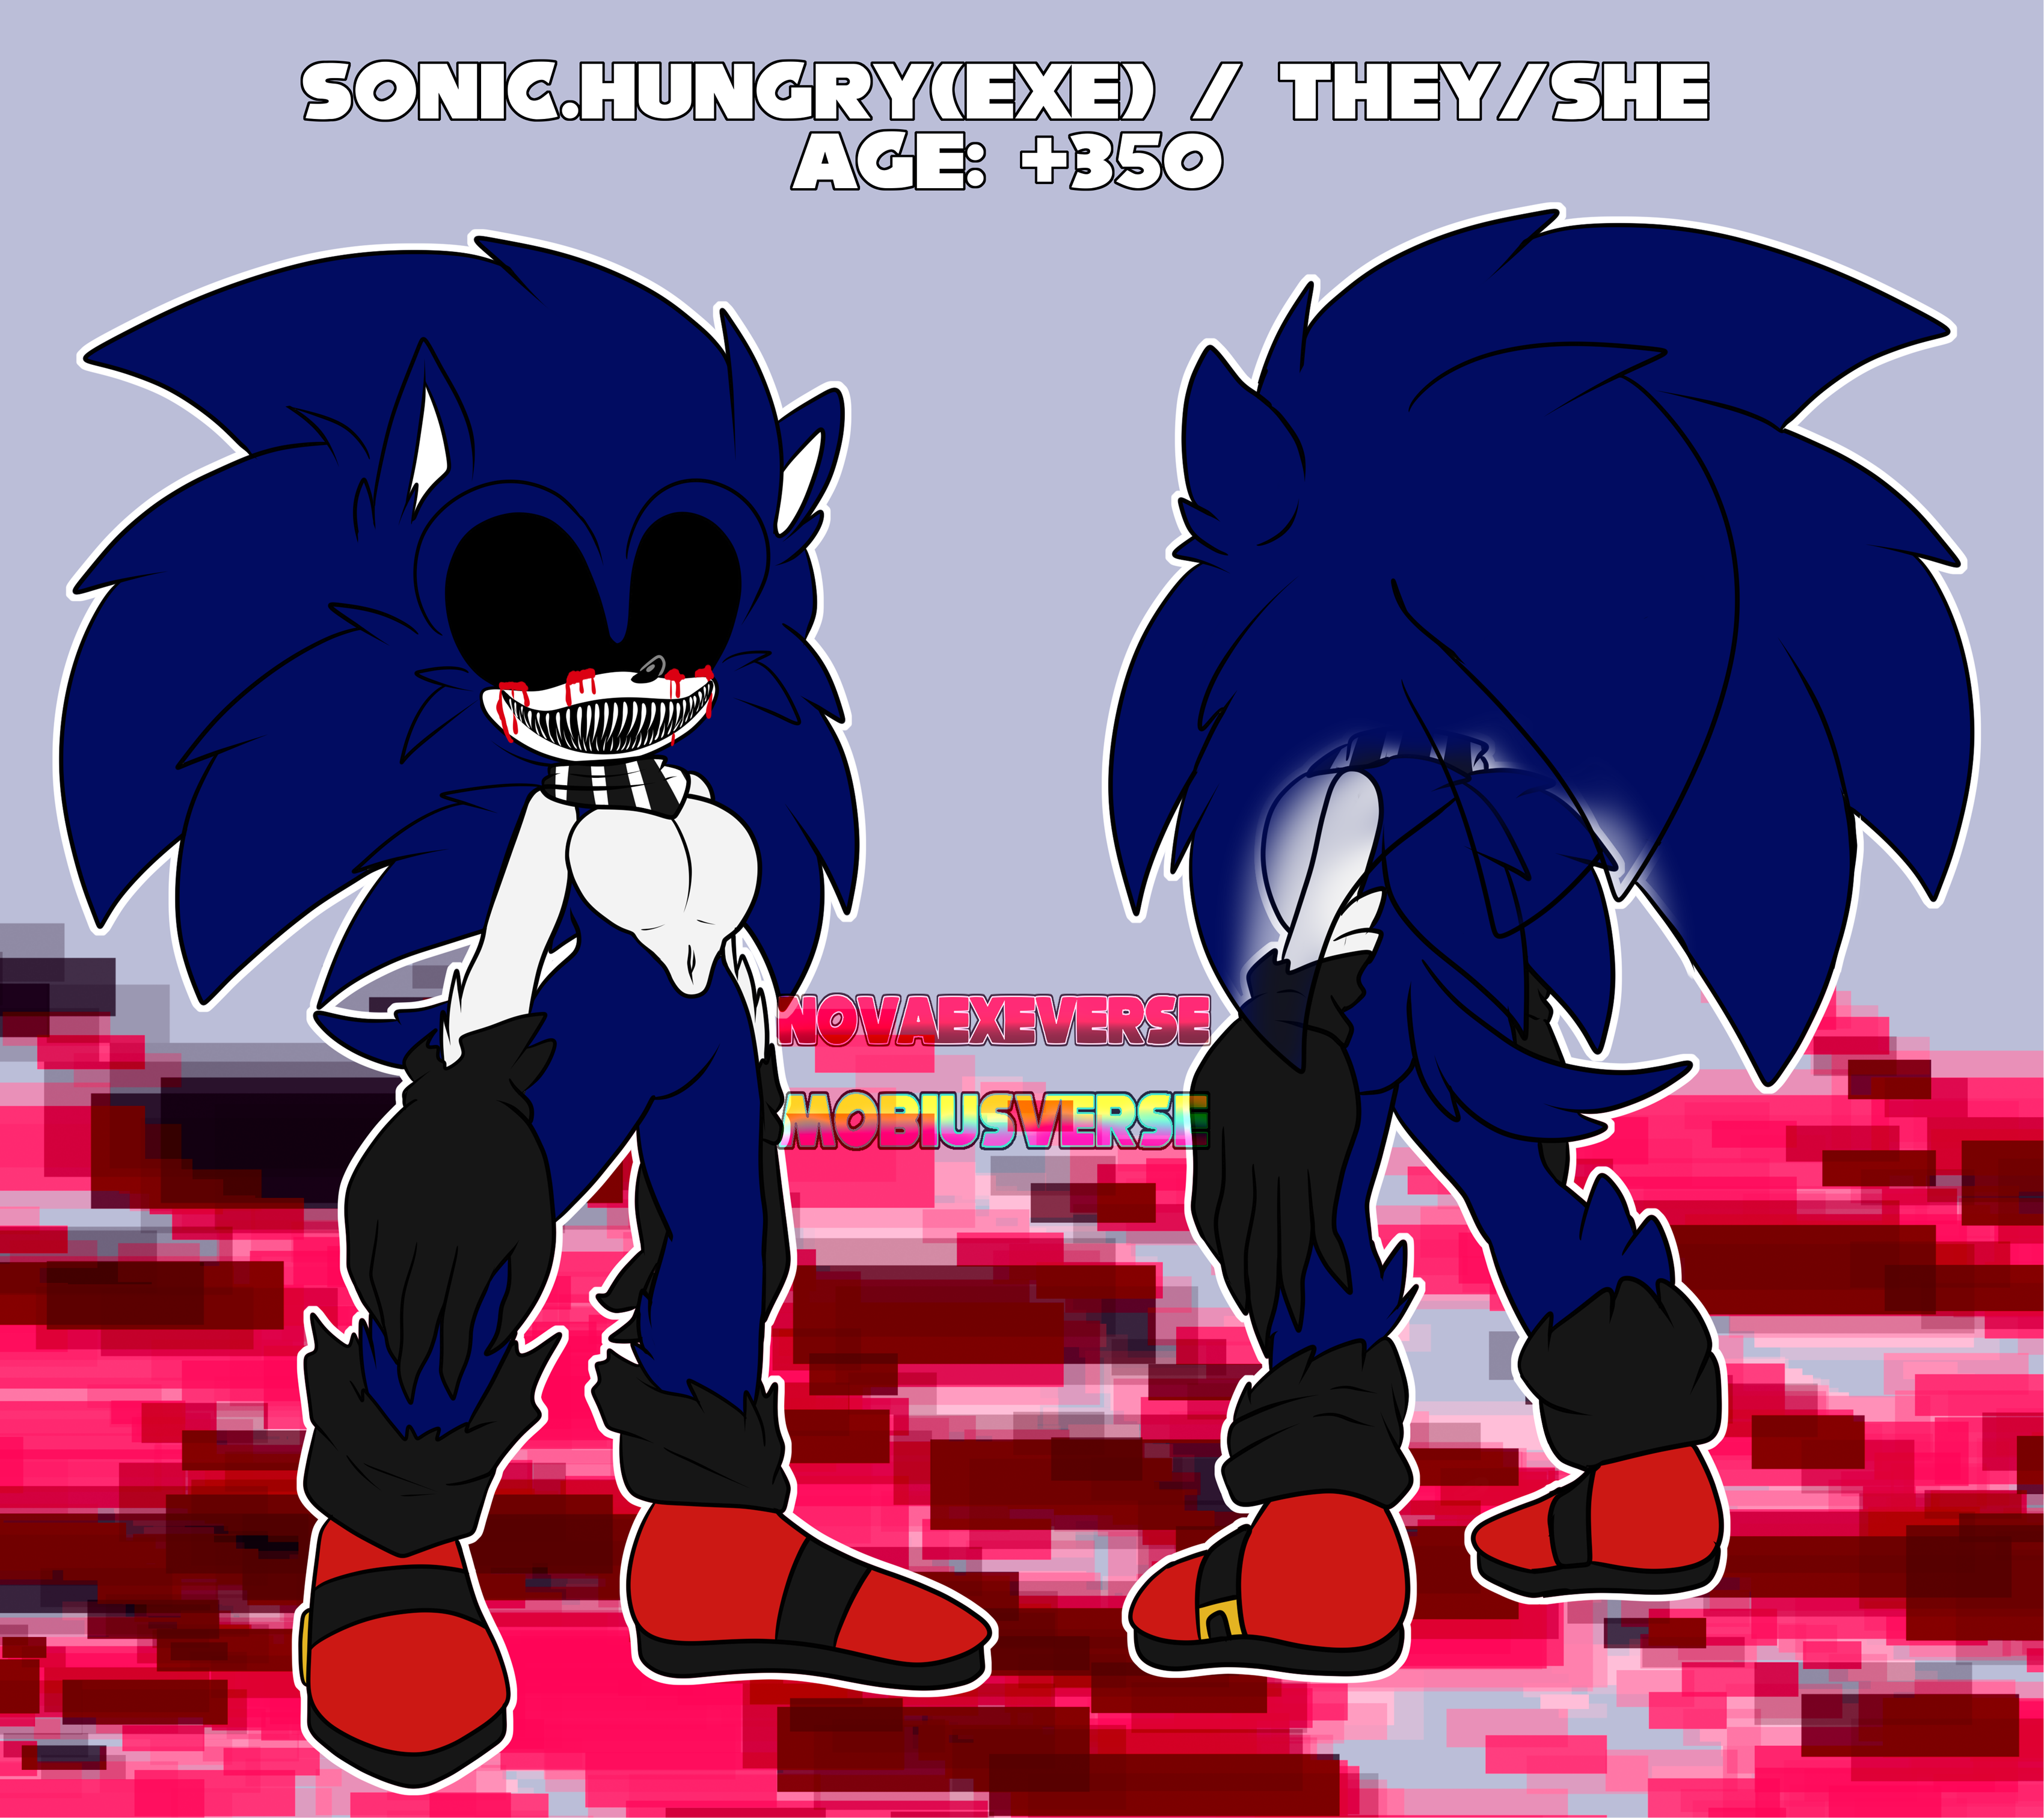 Starved Eggman negotiating with Sonic.exe by EXEExetior on DeviantArt